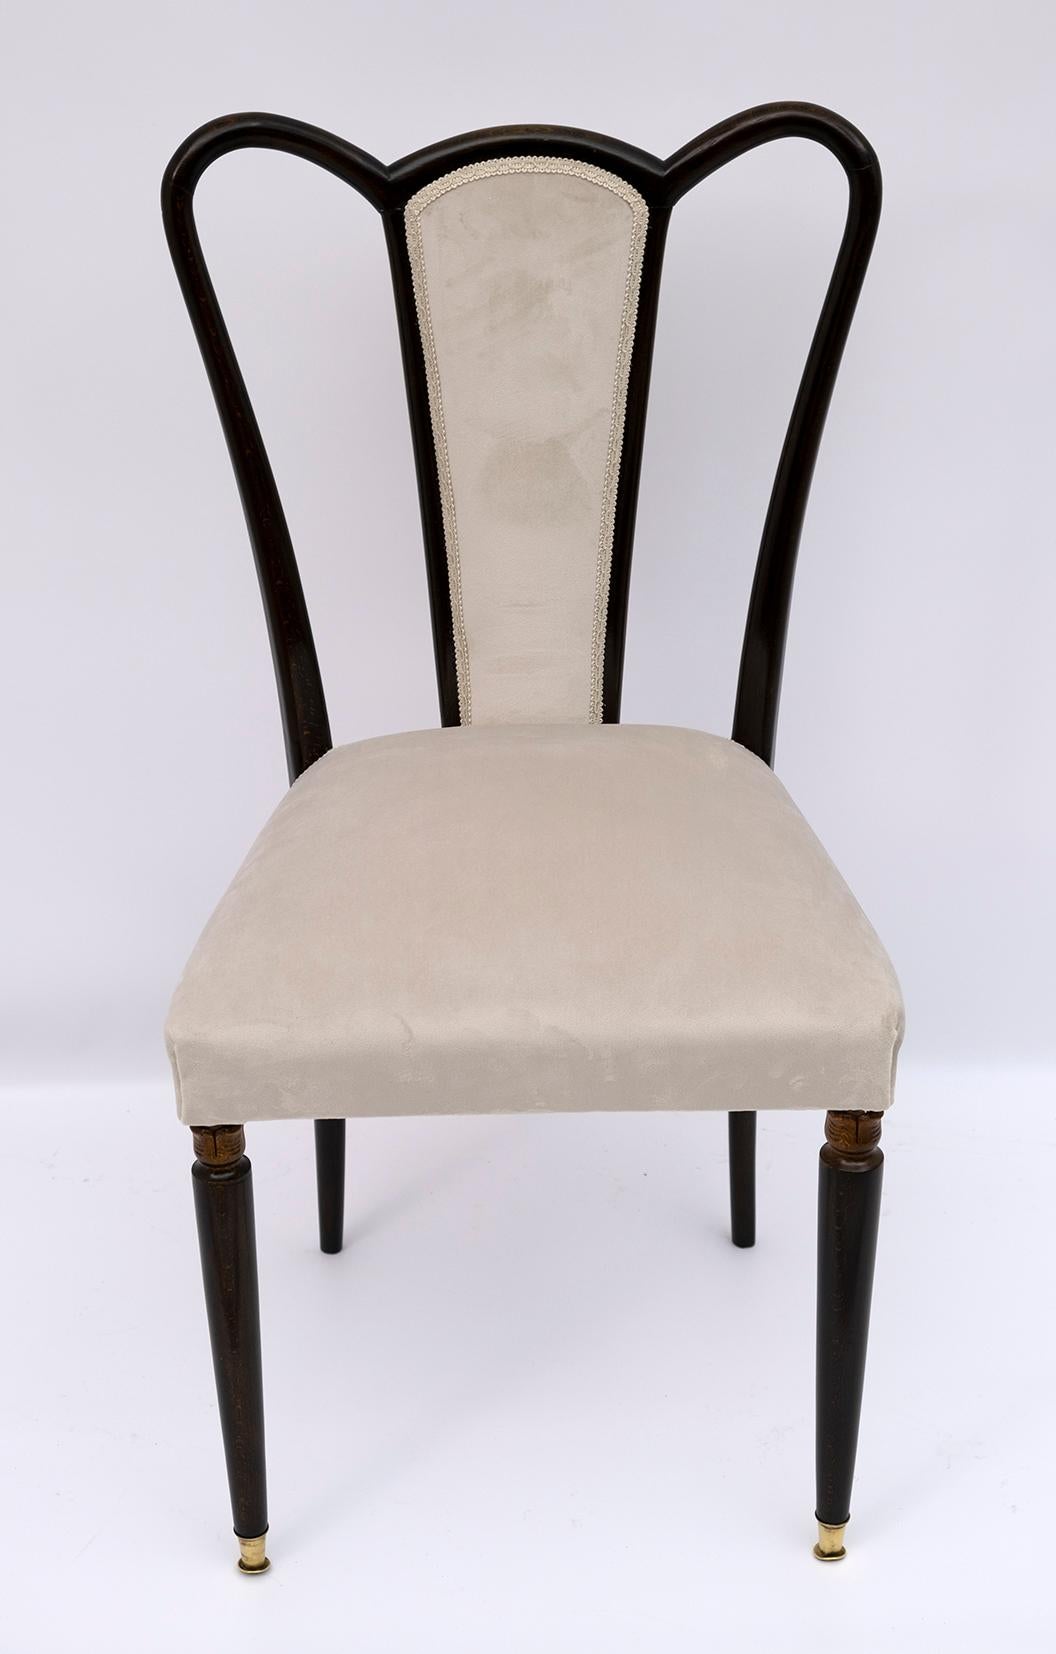 A chair designed by the well-known designer Guglielmo Ulrich and produced by Arredamenti Casa between the 1940s and 1950s. The chair has been restored and upholstered in cream colored velvet. The chair is in dark walnut-stained bent beech.

In